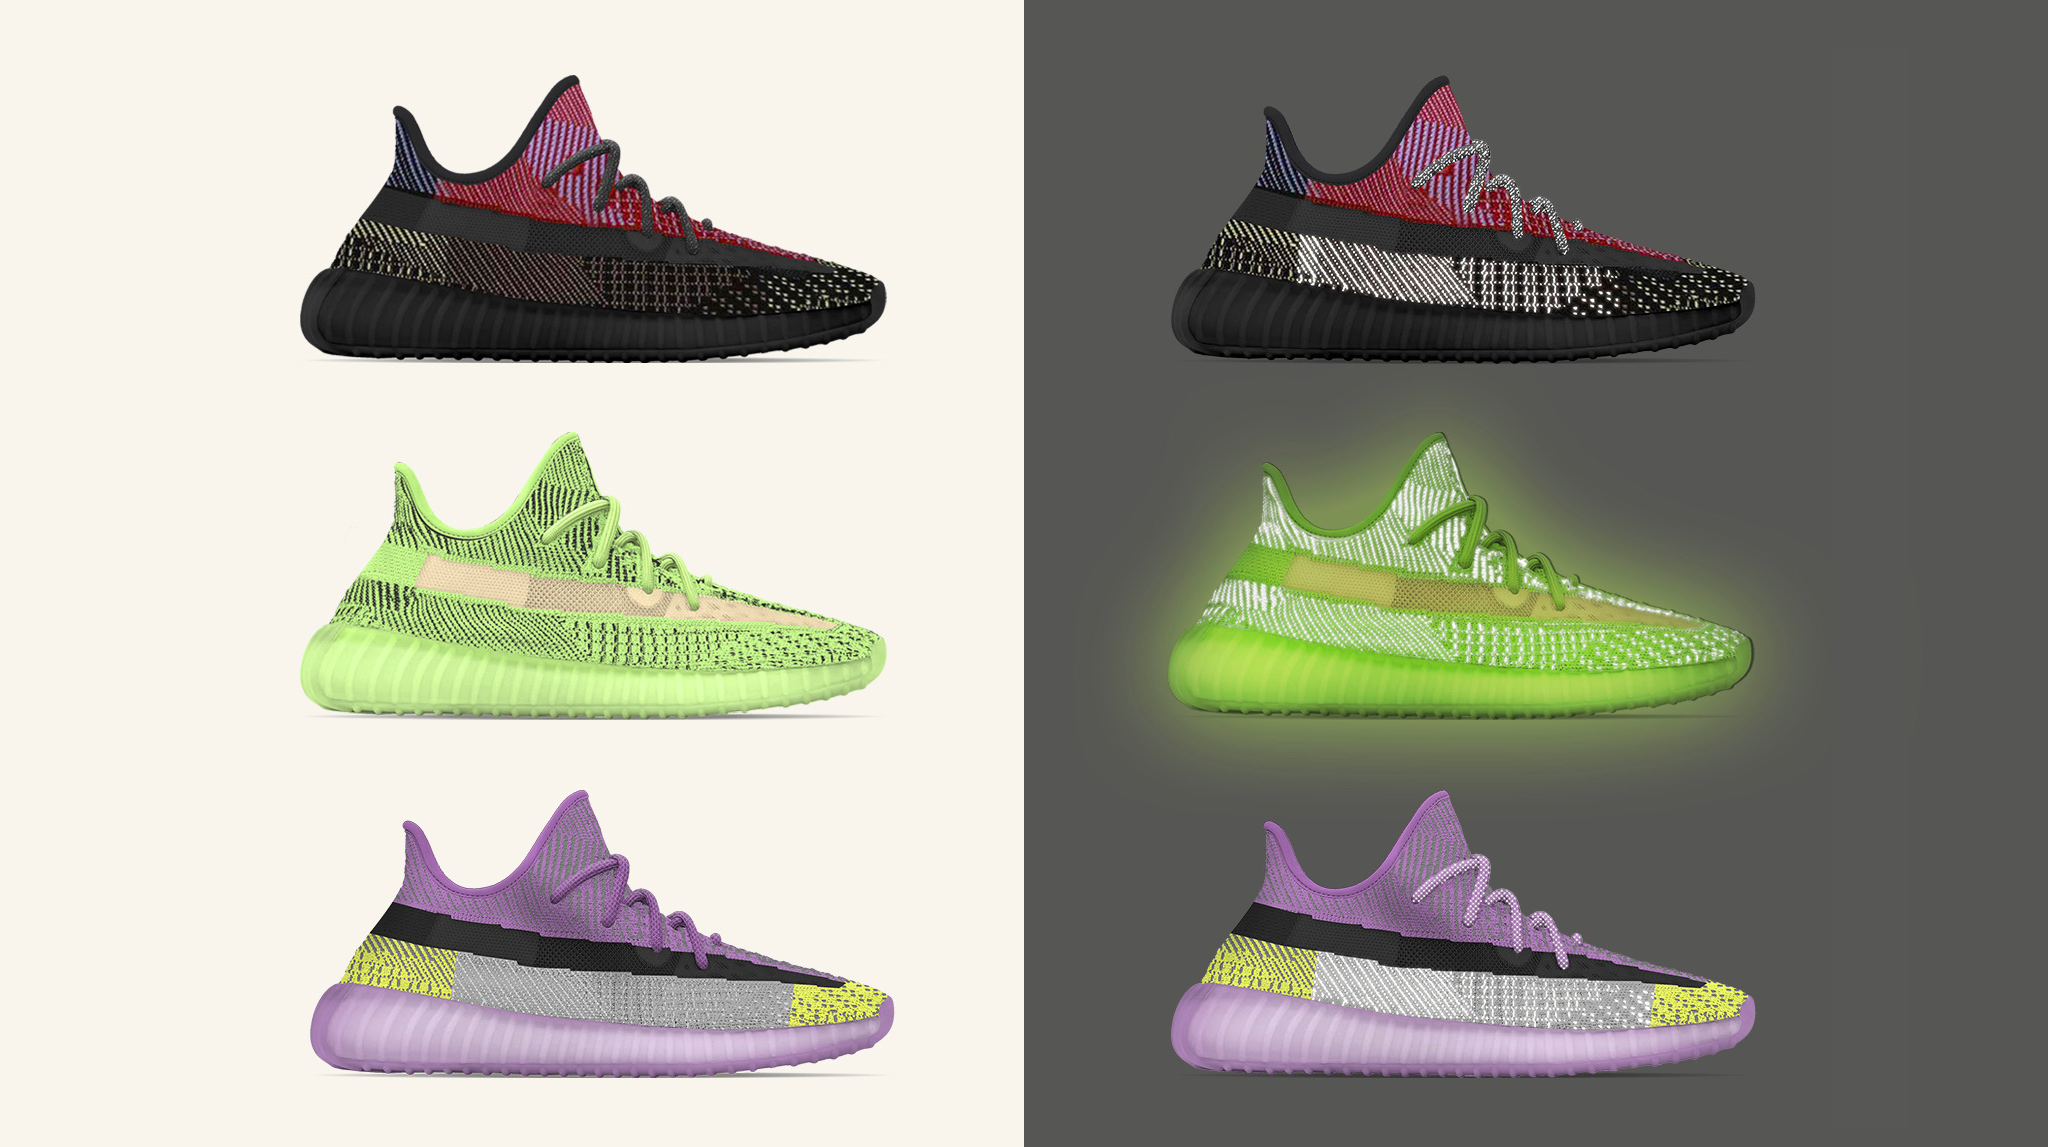 yeezy limited edition 2019